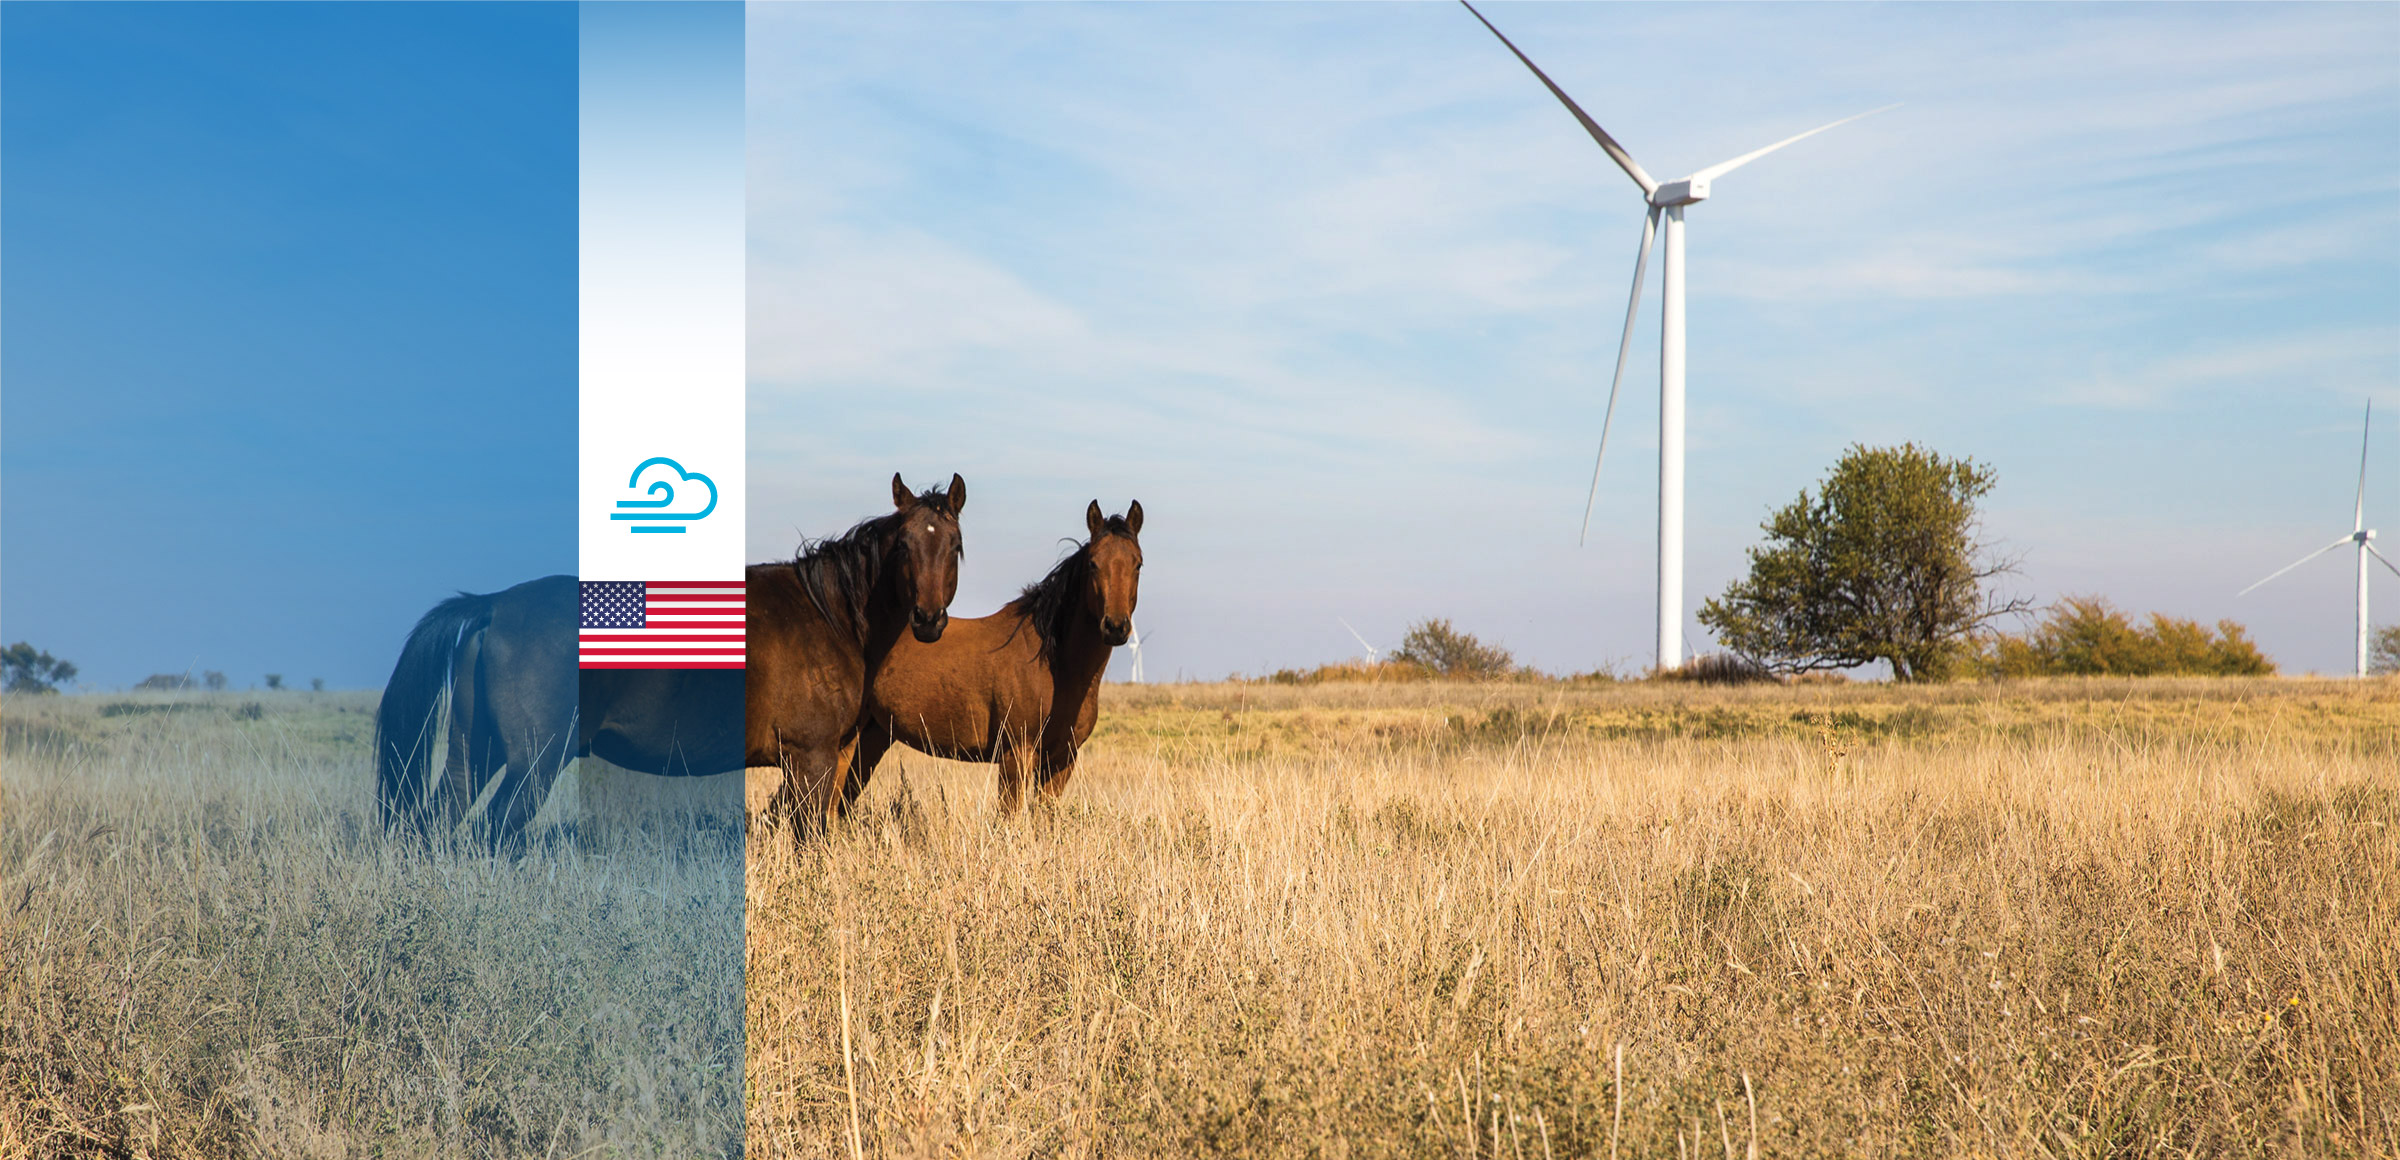 The Red Dirt wind farm in Oklahoma is breathing new life into the local economy